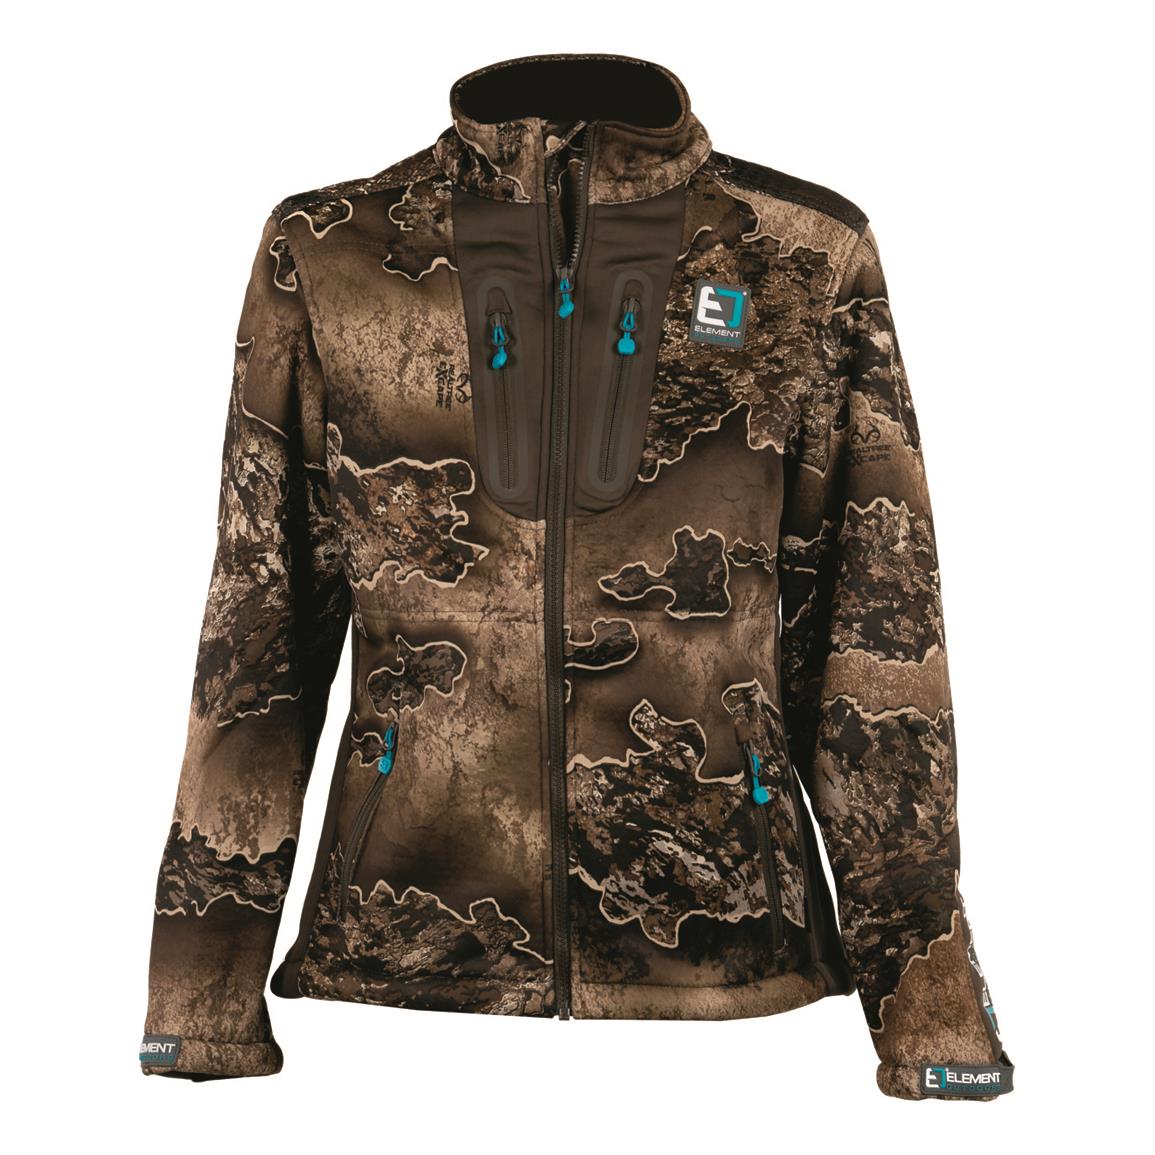 Element Outdoors Women's Axis Series Midweight Hunting Jacket, Excape